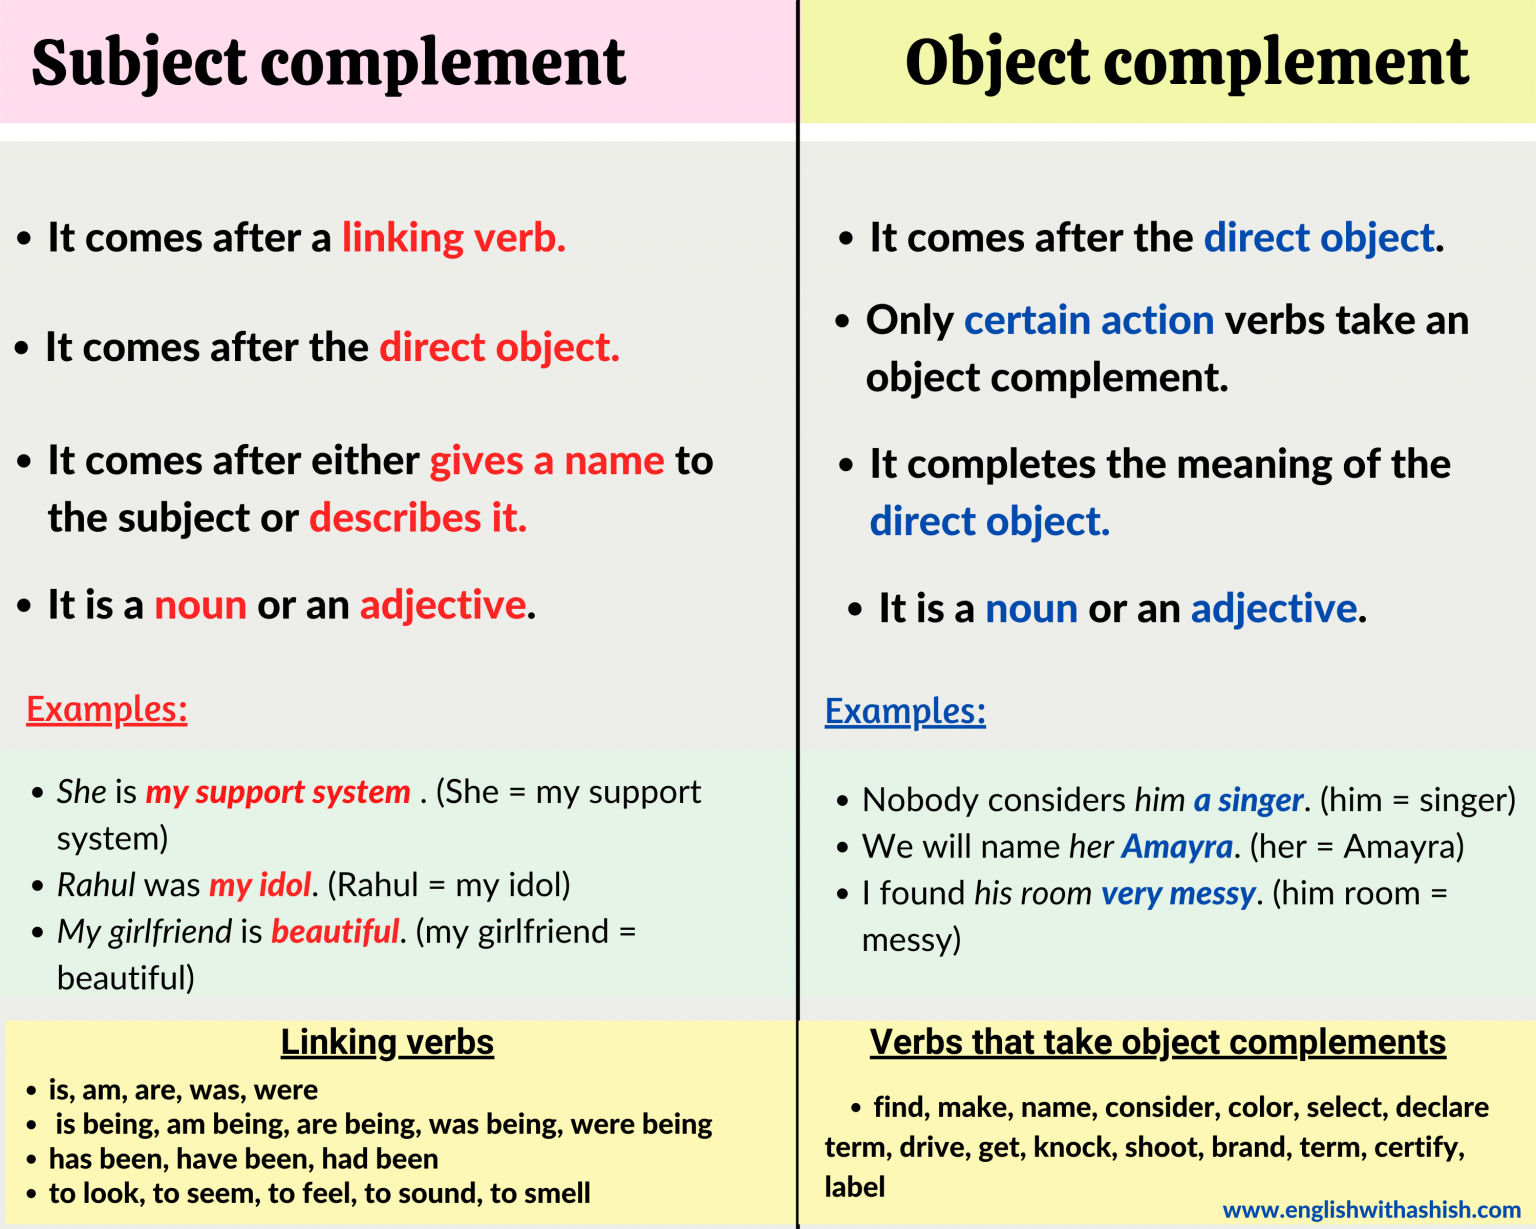 difference-between-the-subject-complement-and-the-object-complement